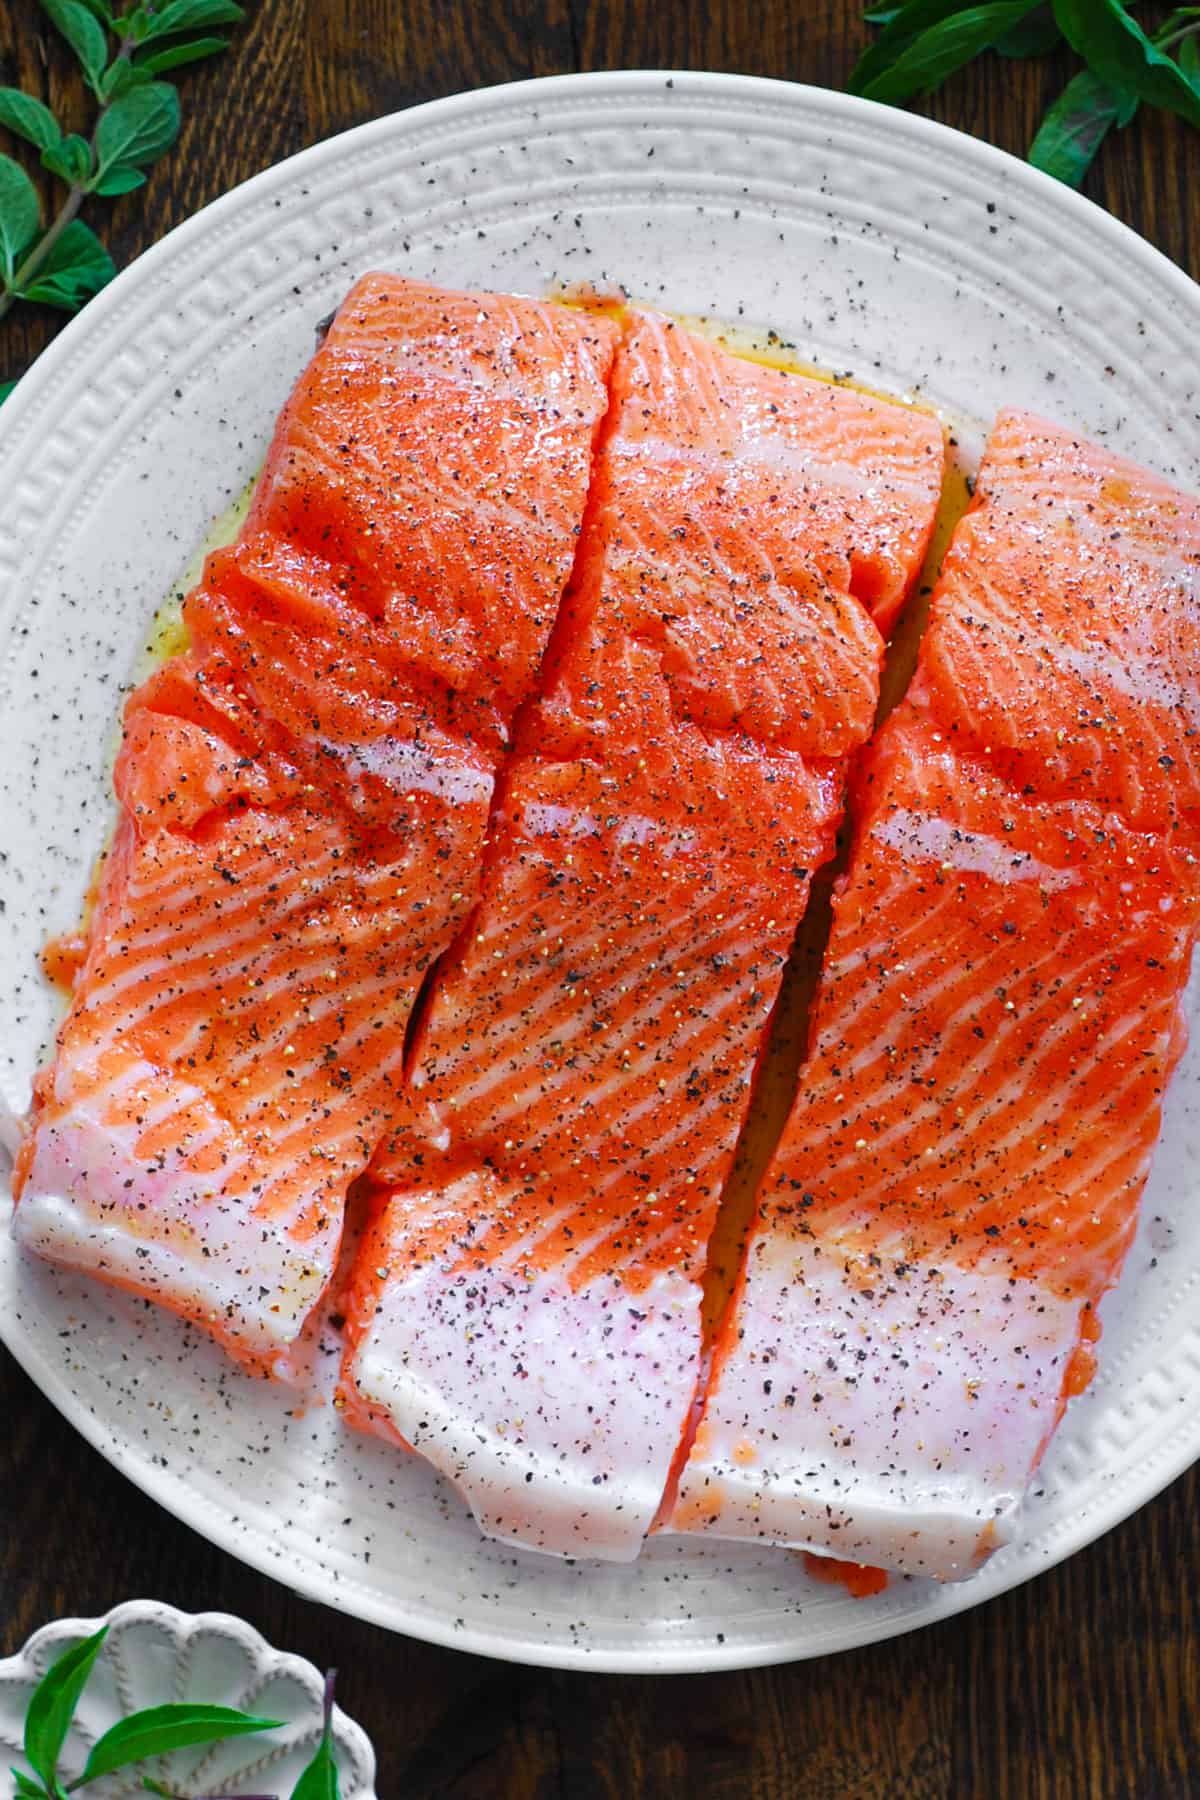 3 raw salmon fillets on a white plate.